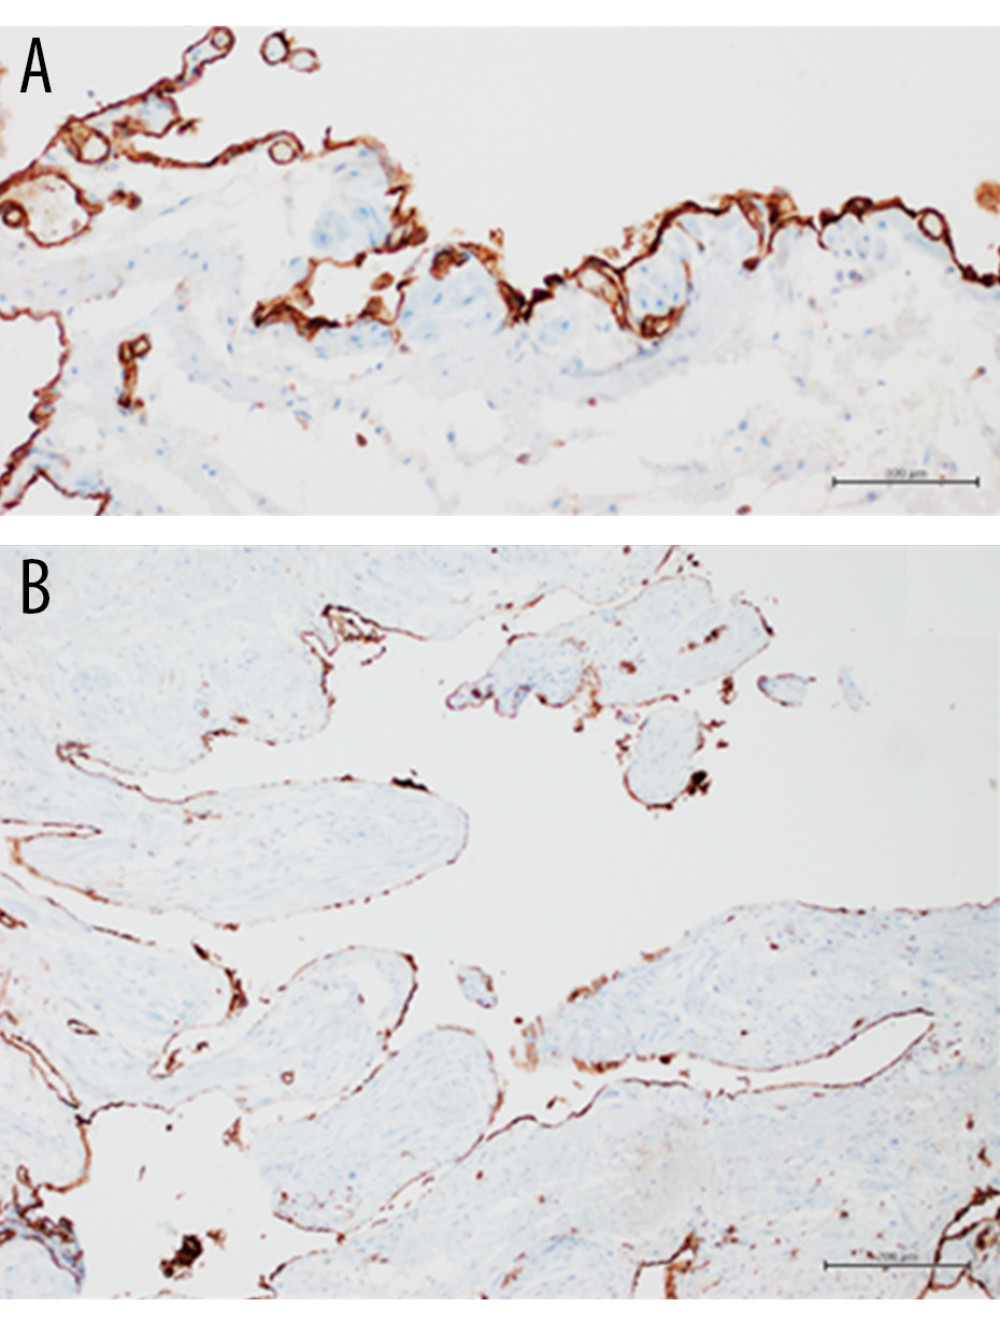 Immunohistochemical analysis showed endothelial positivity for CD34 (A: 20× magnification, scale bar 100 µm) and CD31 (B: 10× magnification, scale bar 200 µm).